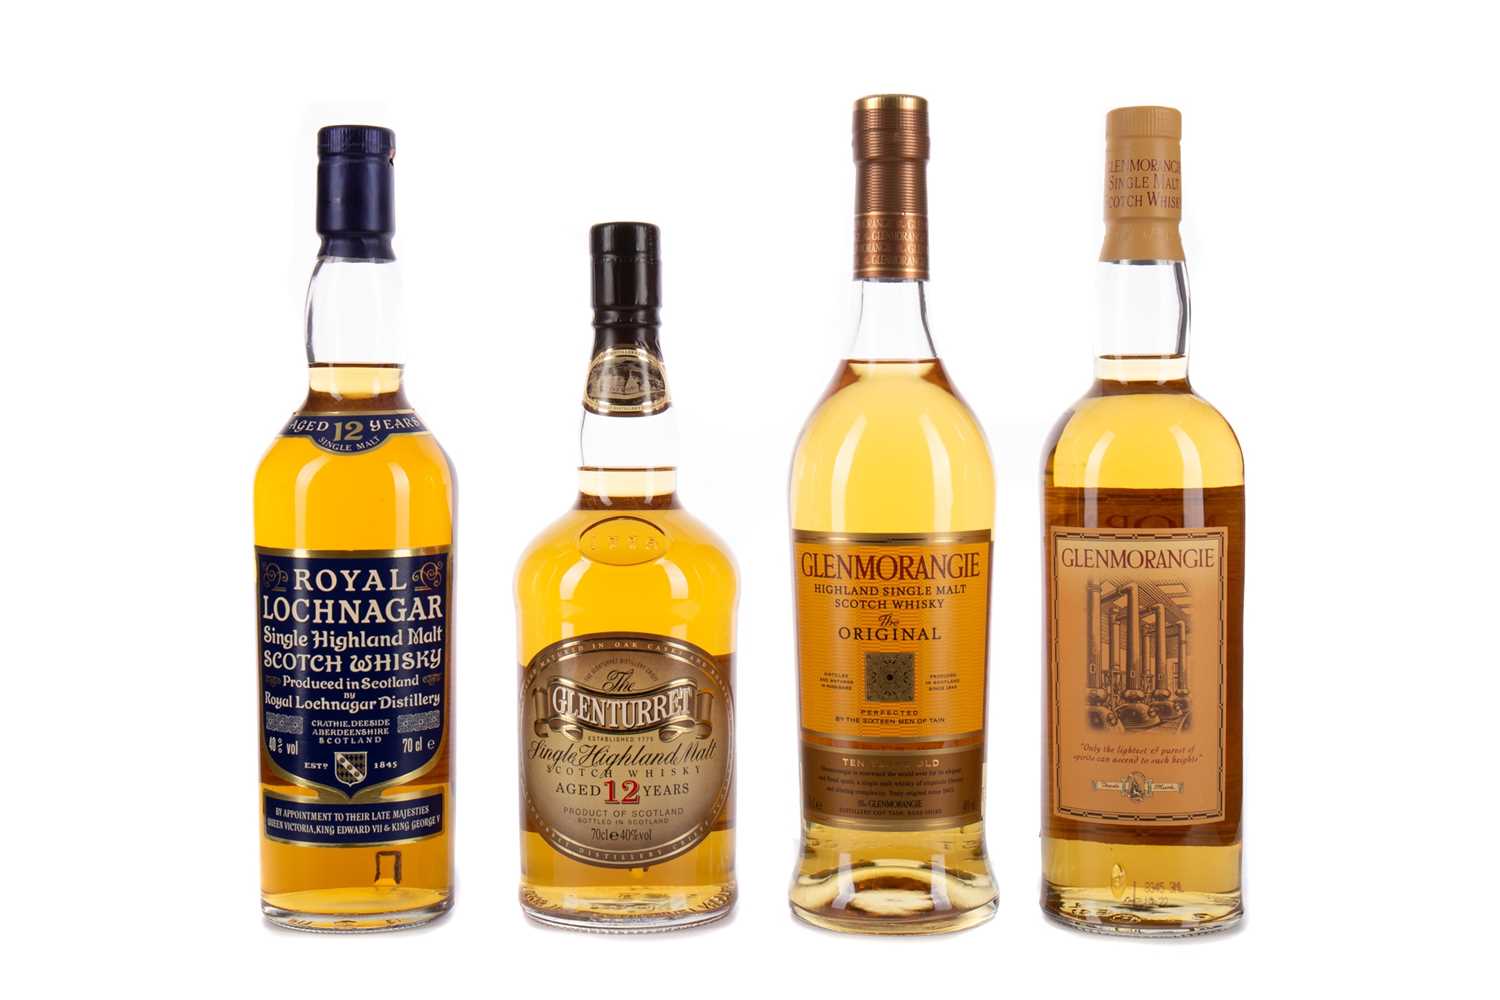 Lot 160 - ROYAL LOCHNAGAR AGED 12 YEARS, GLENTURRET AGED 12 YEARS AND TWO GLENMORANGIE 10 YEARS OLD